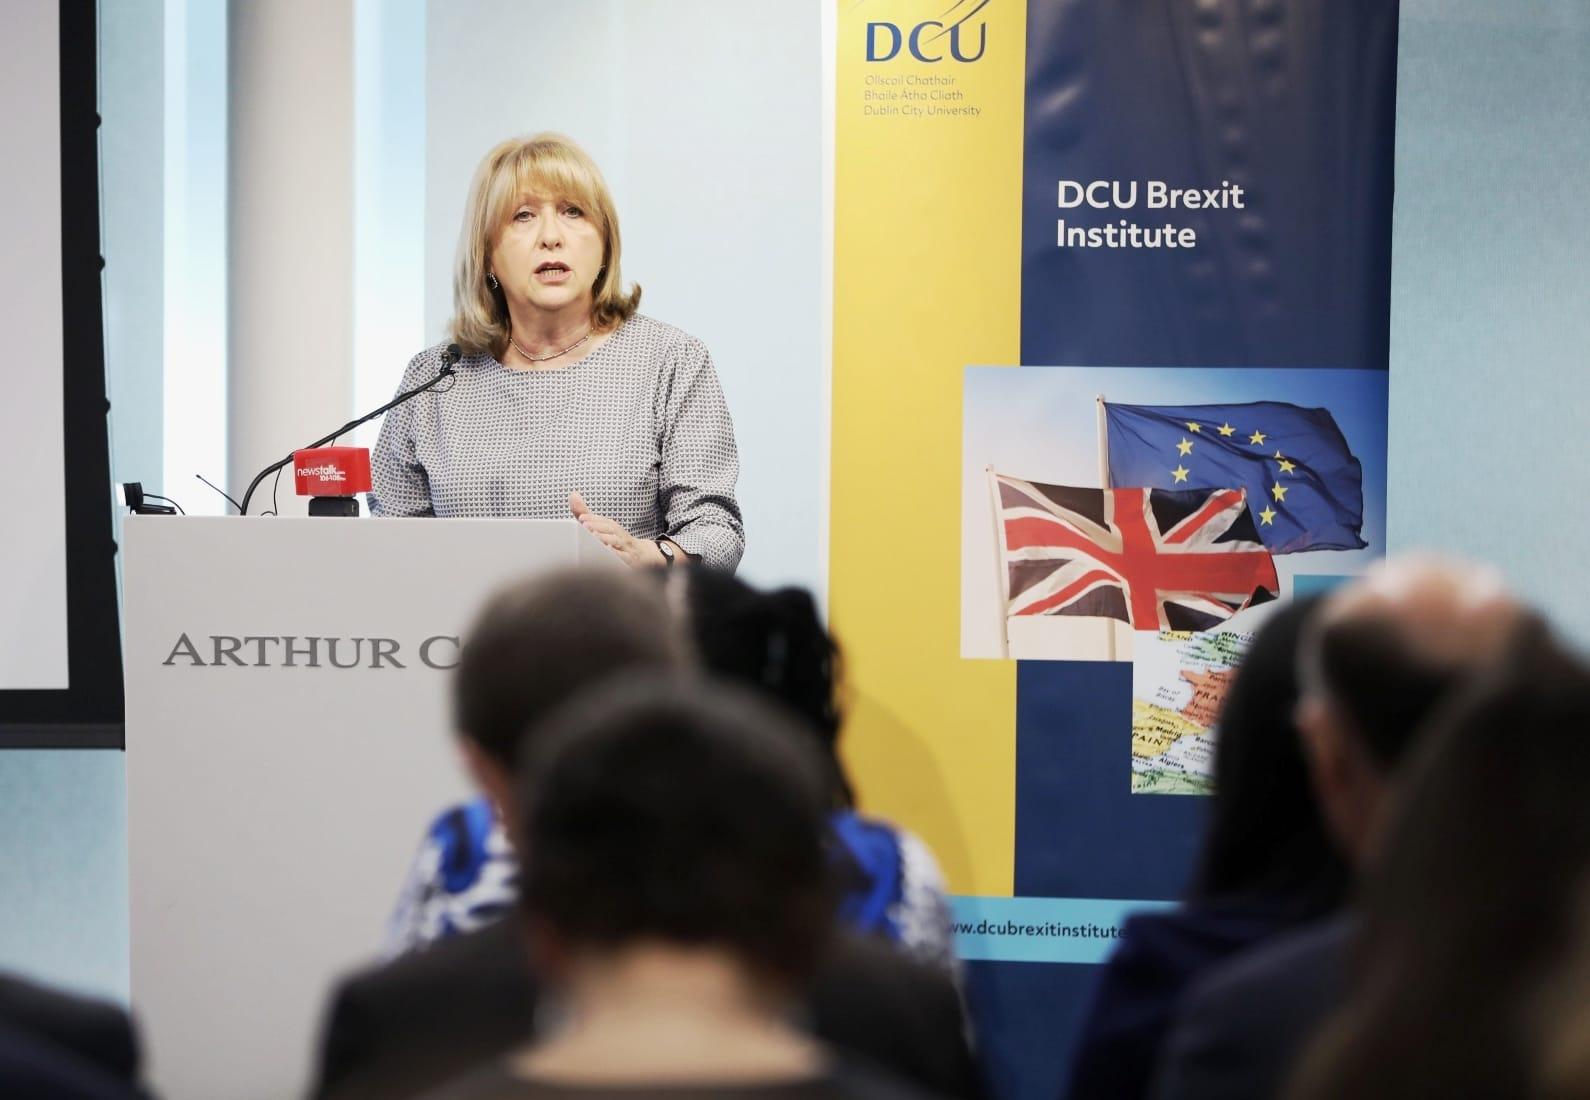 Mary McAleese at the DCU Brexit Institute hosted by Arthur Cox